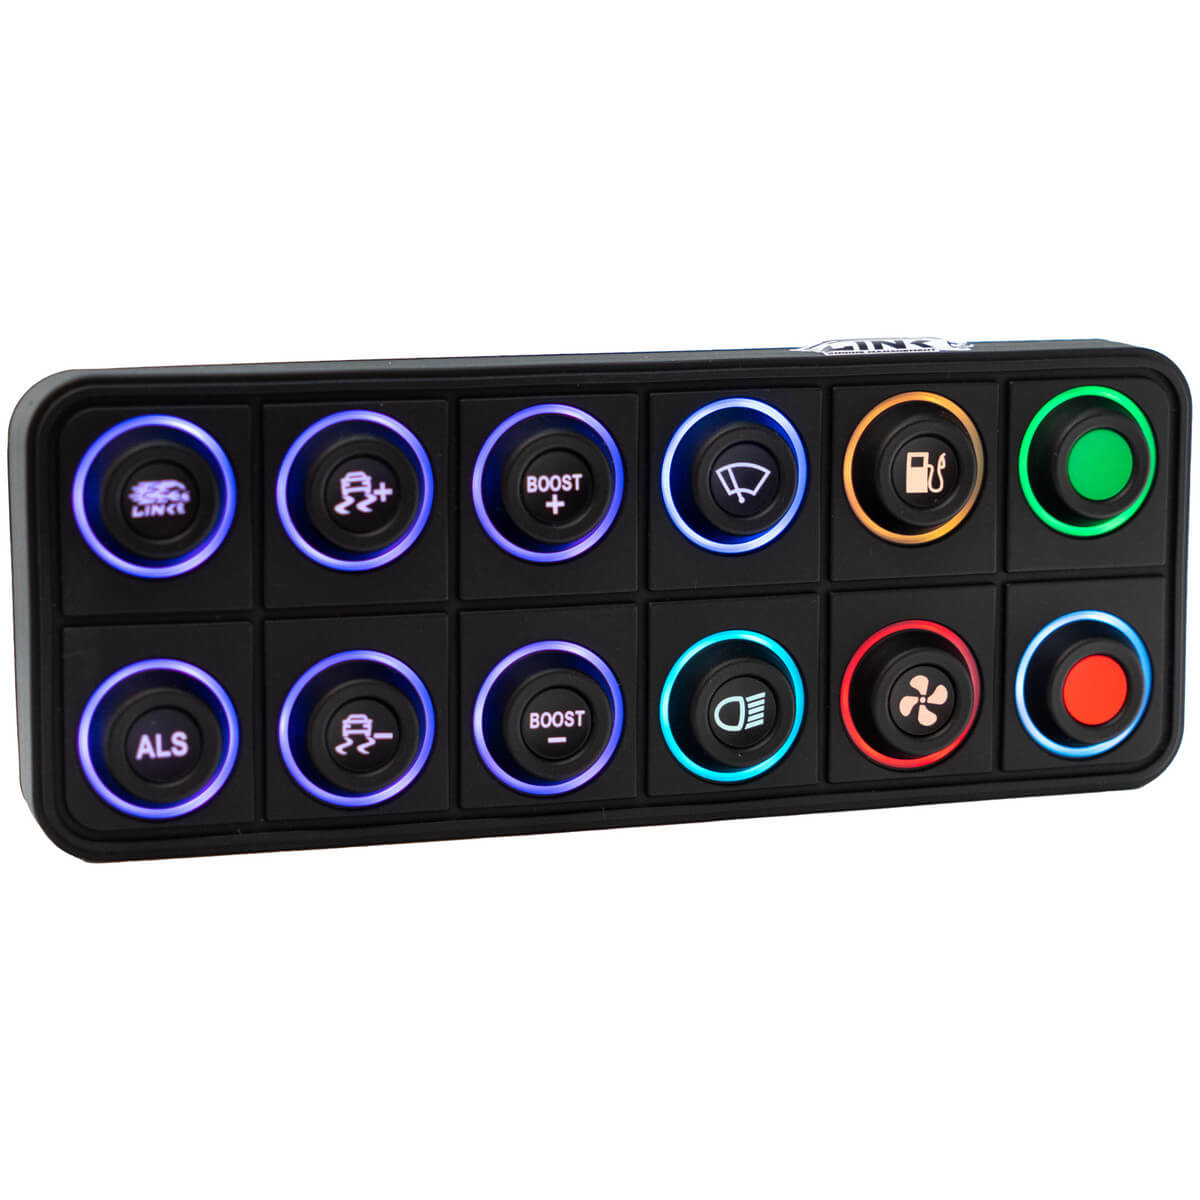 Link ECU 101-0239 12 key (2x6) CAN Keypad with interchangeable 15mm inserts (sold separately) Photo-0 